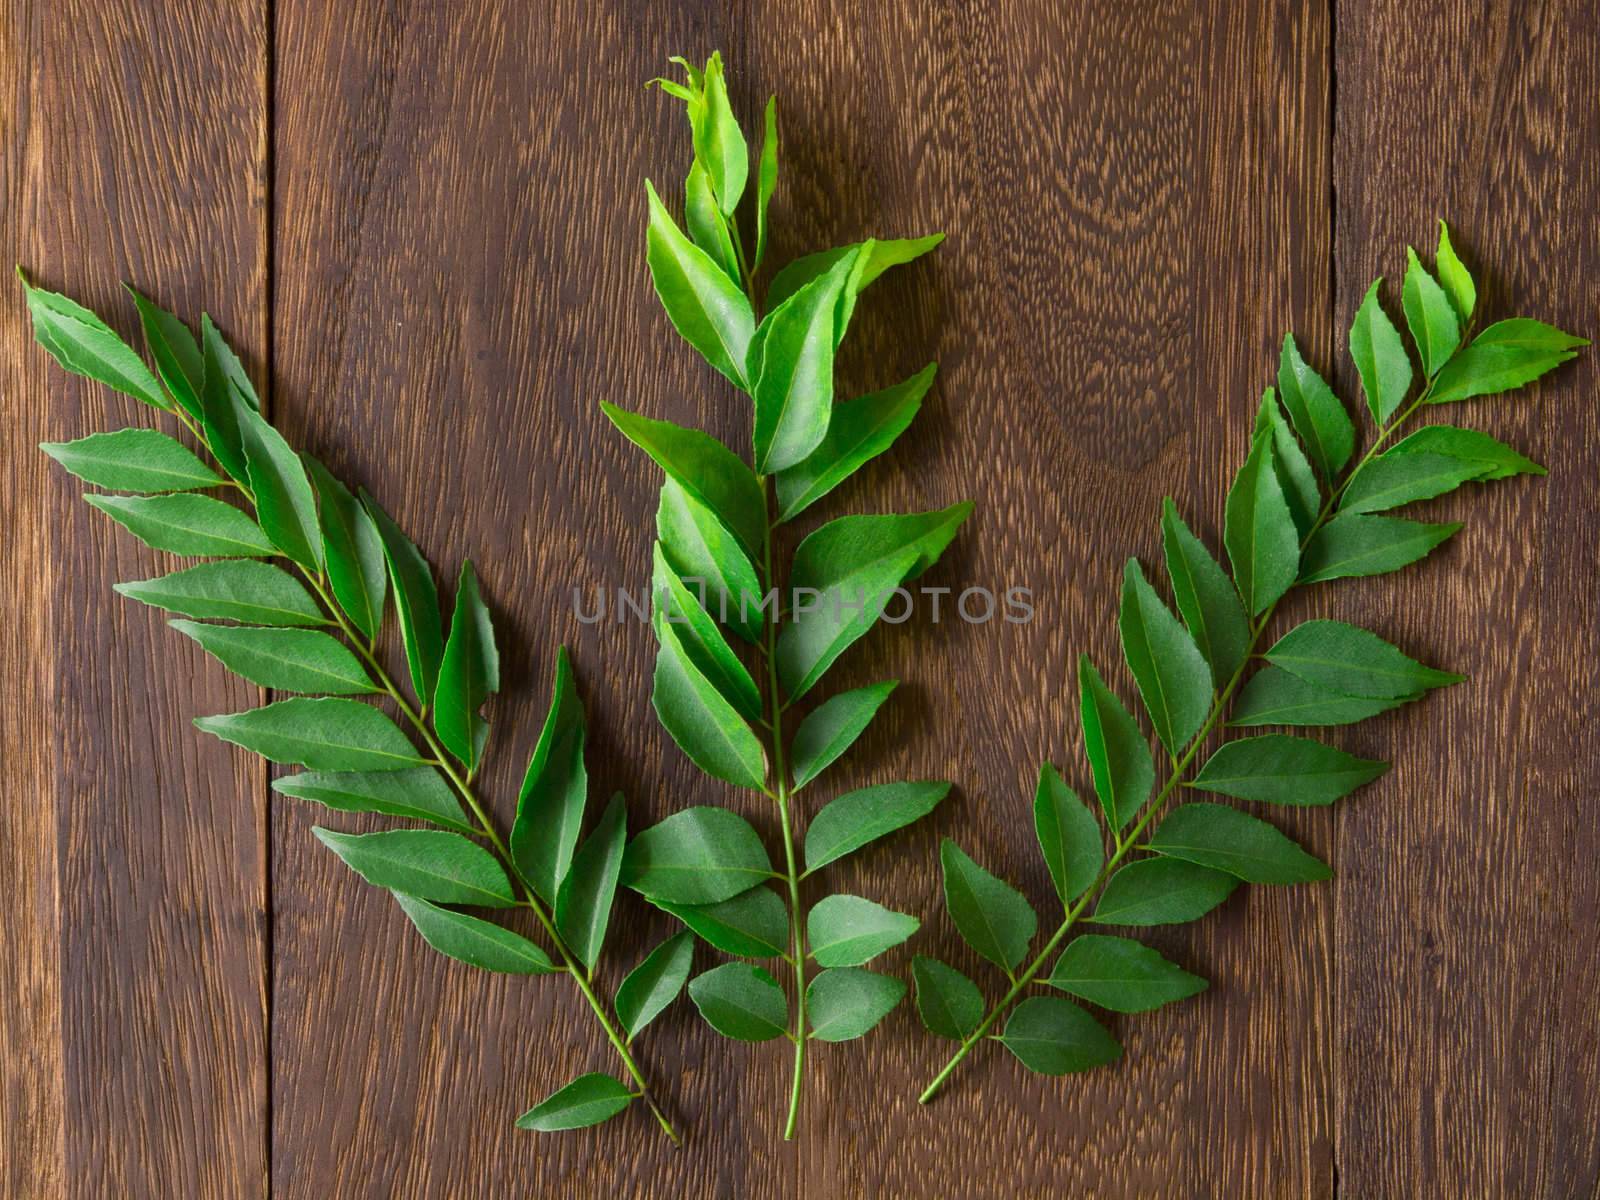 curry leaves by zkruger